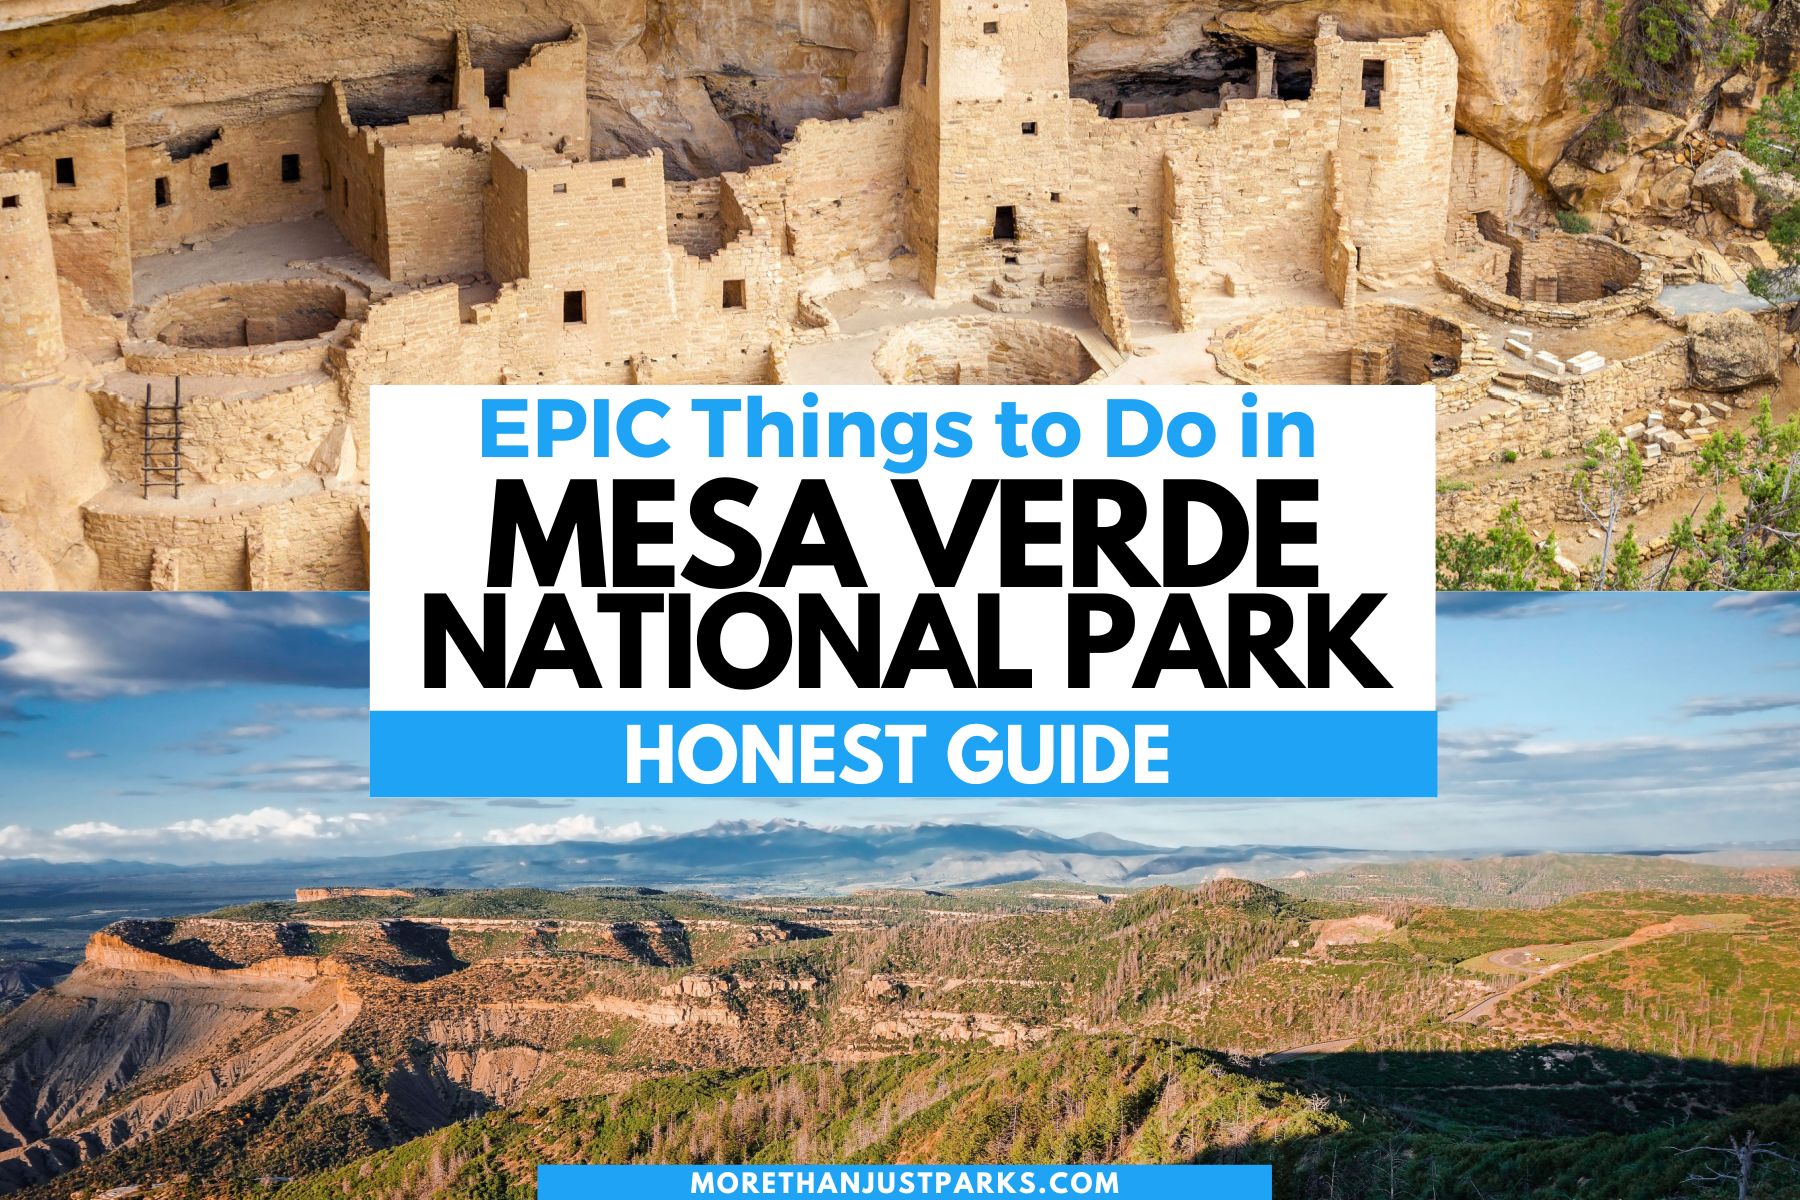 Things to Do in Mesa Verde National Park